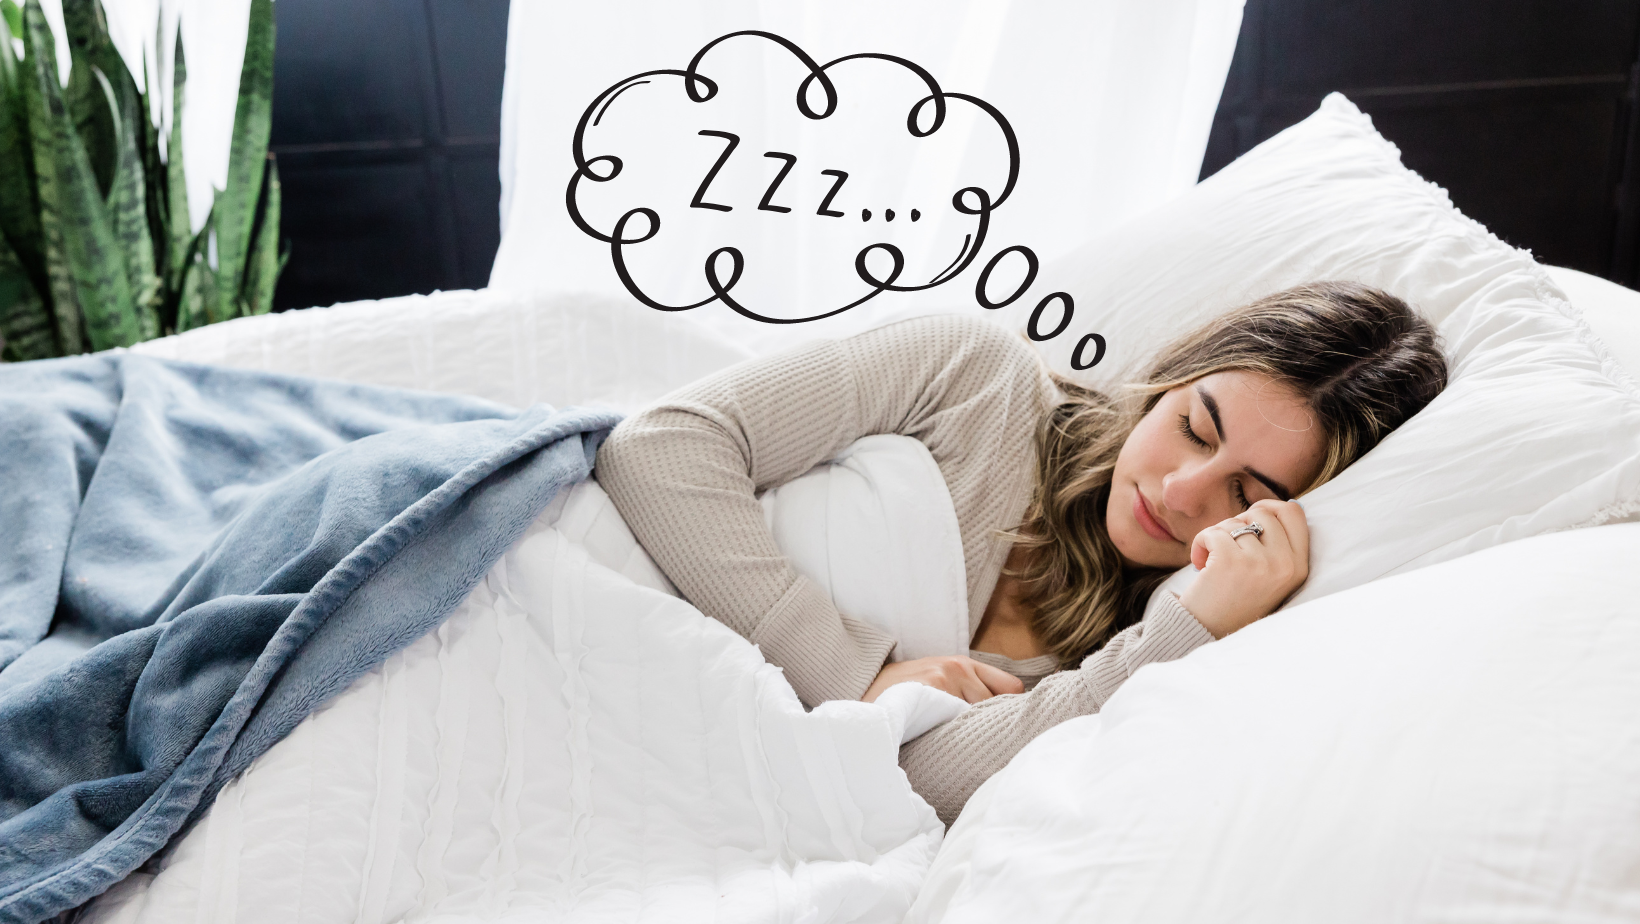 Why is sleep important to your health?